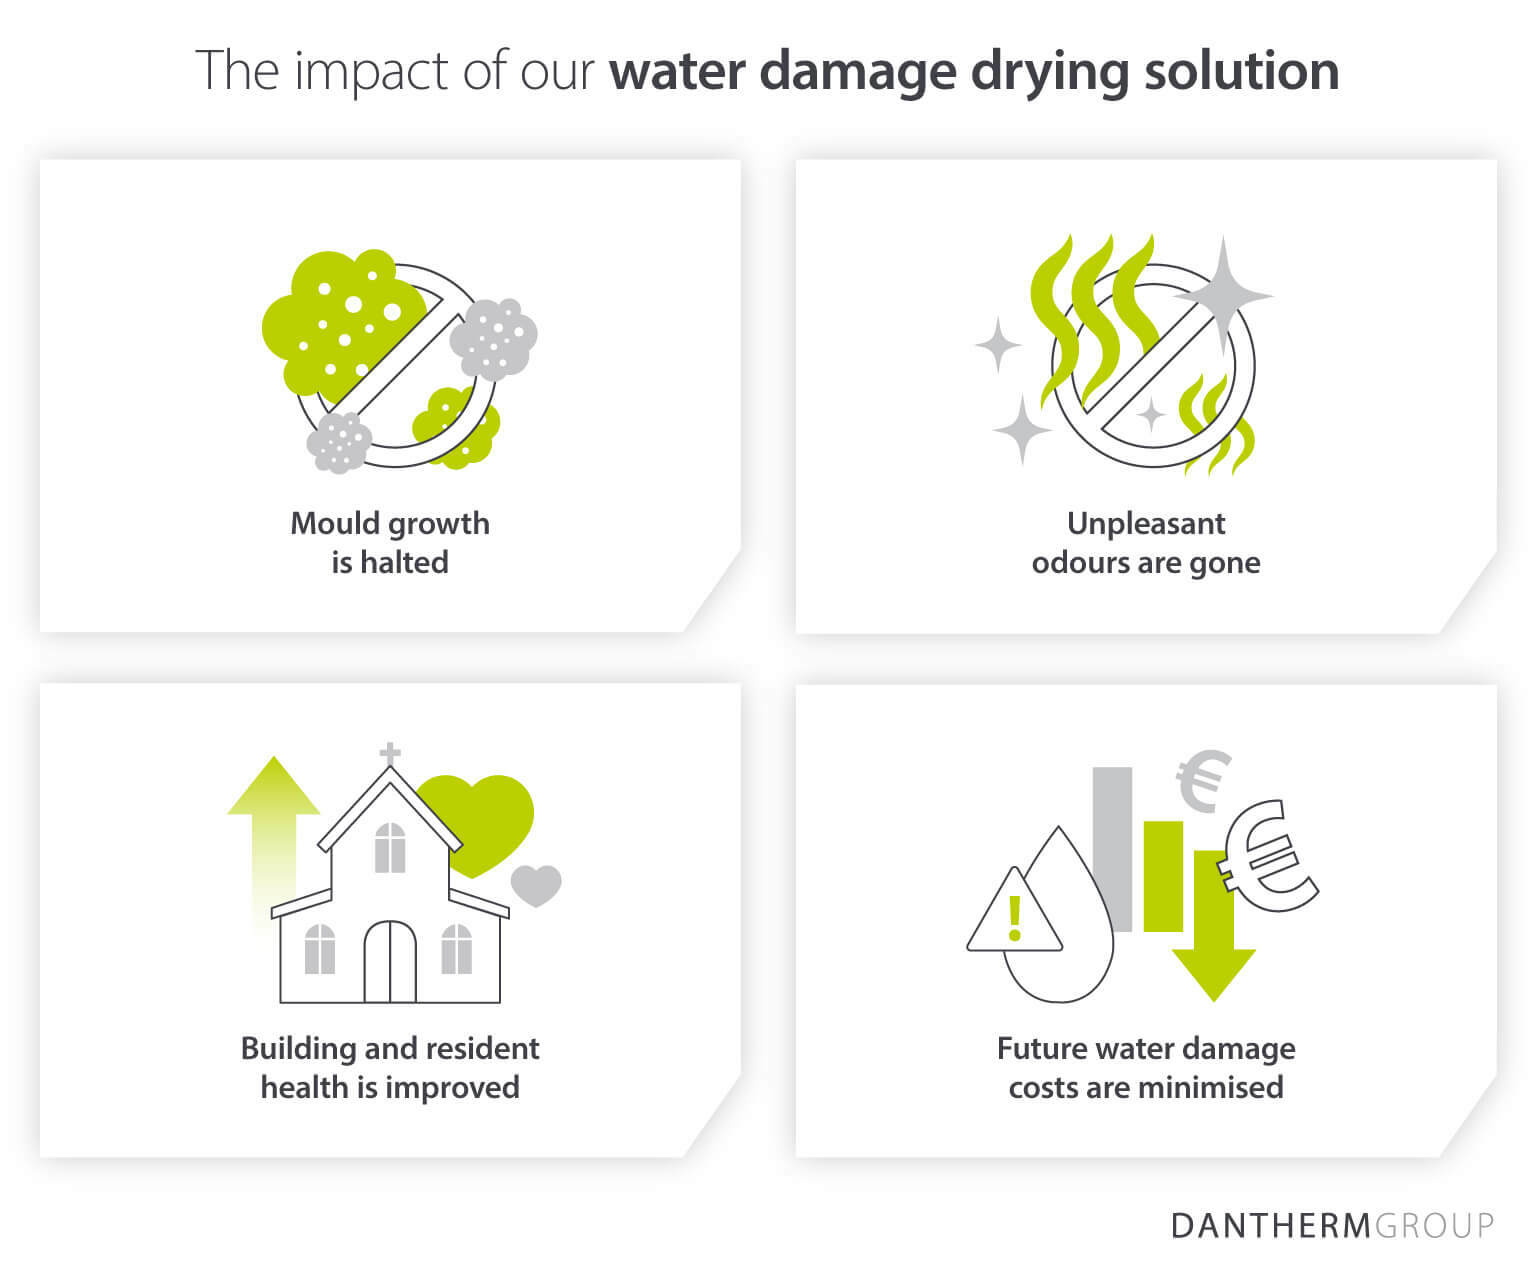 The positive impact and results of our water damage drying solution